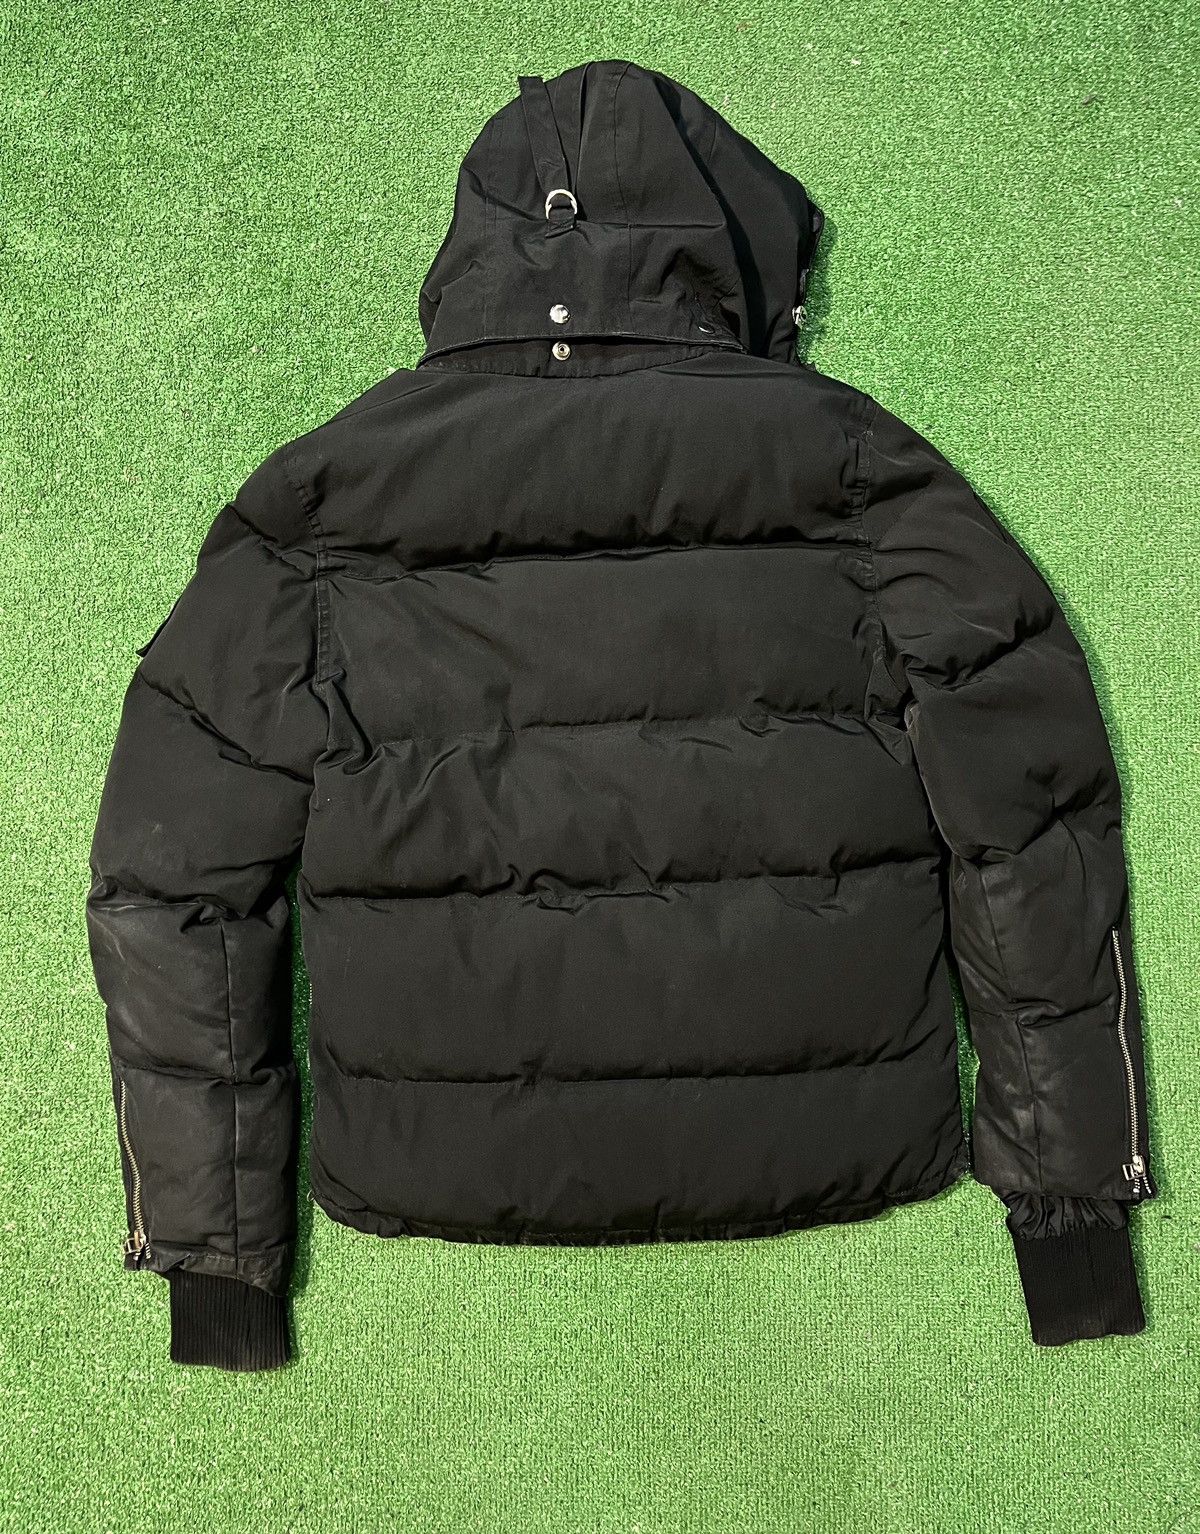 Moose Knuckles Moose Knuckles Down Jacket Canada Size US S / EU 44-46 / 1 - 2 Preview